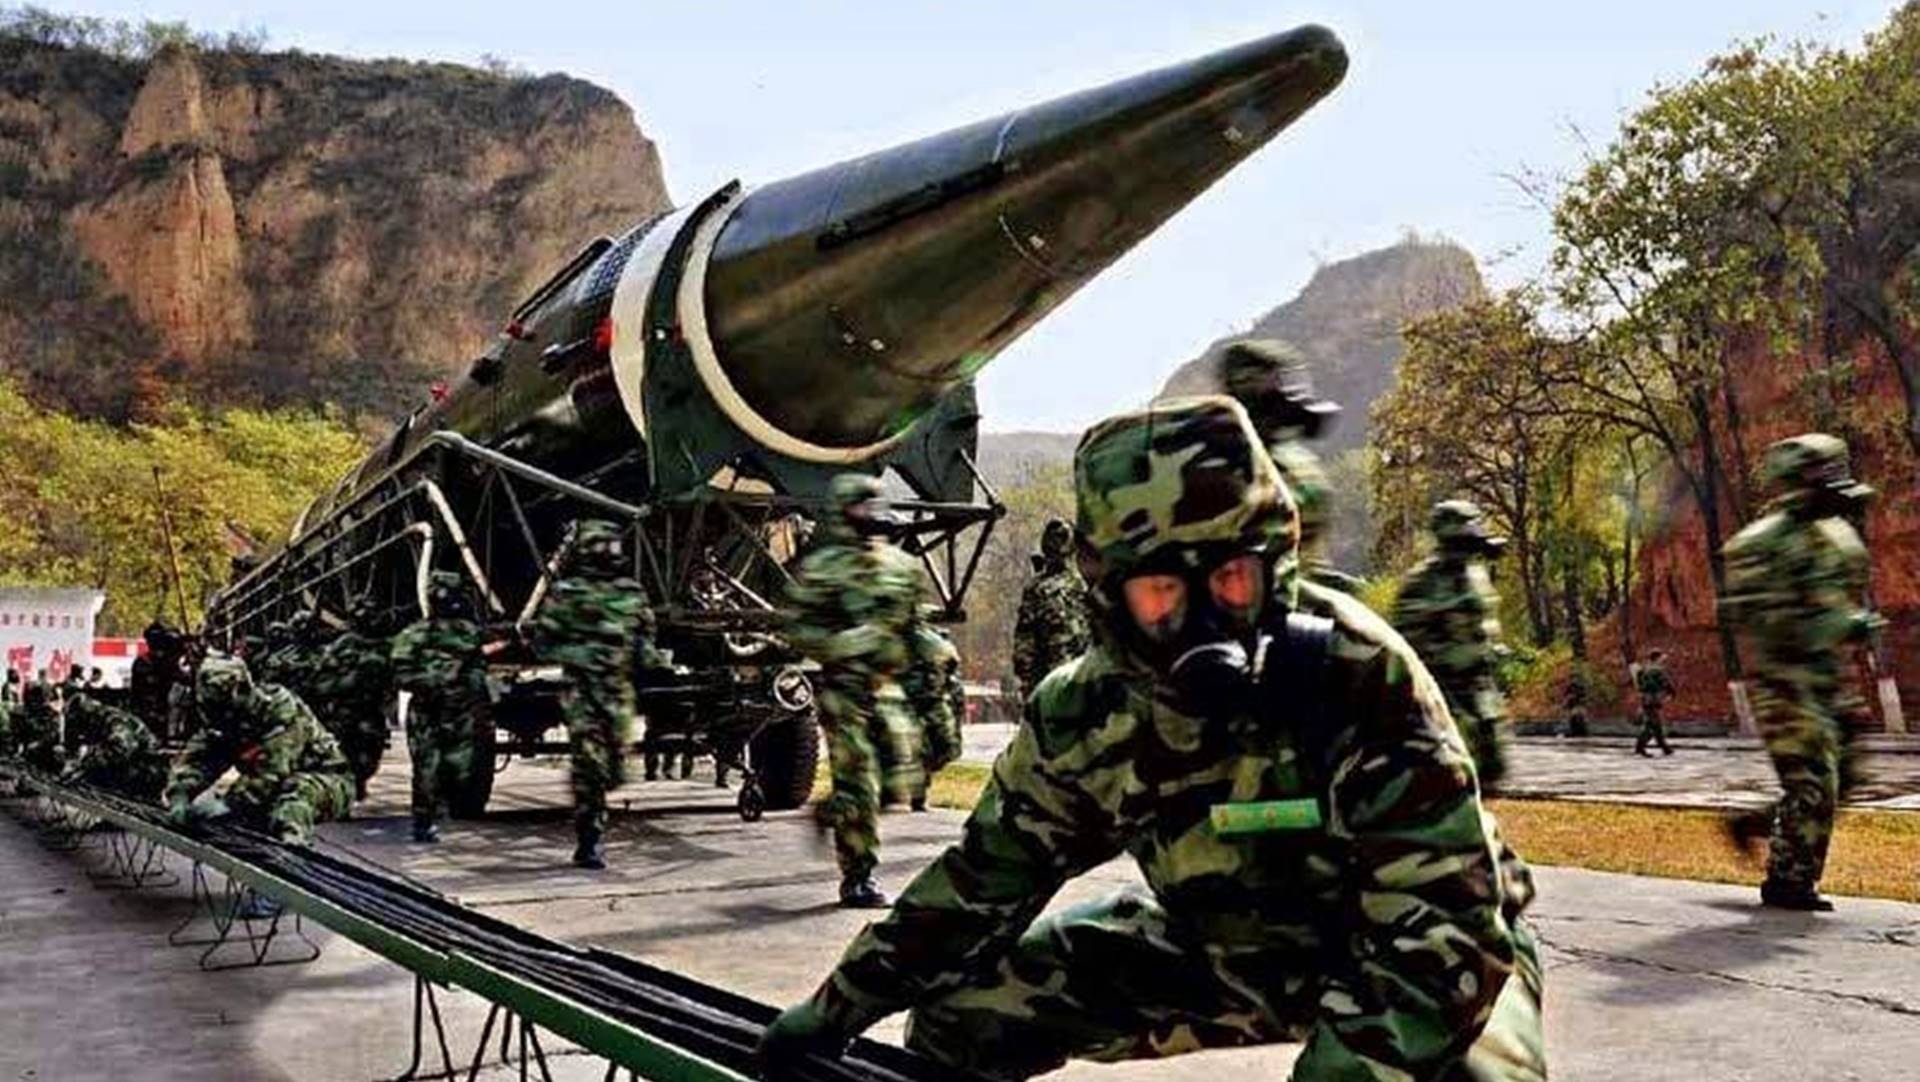 China has said it intends its nuclear weapons solely as a deterrent